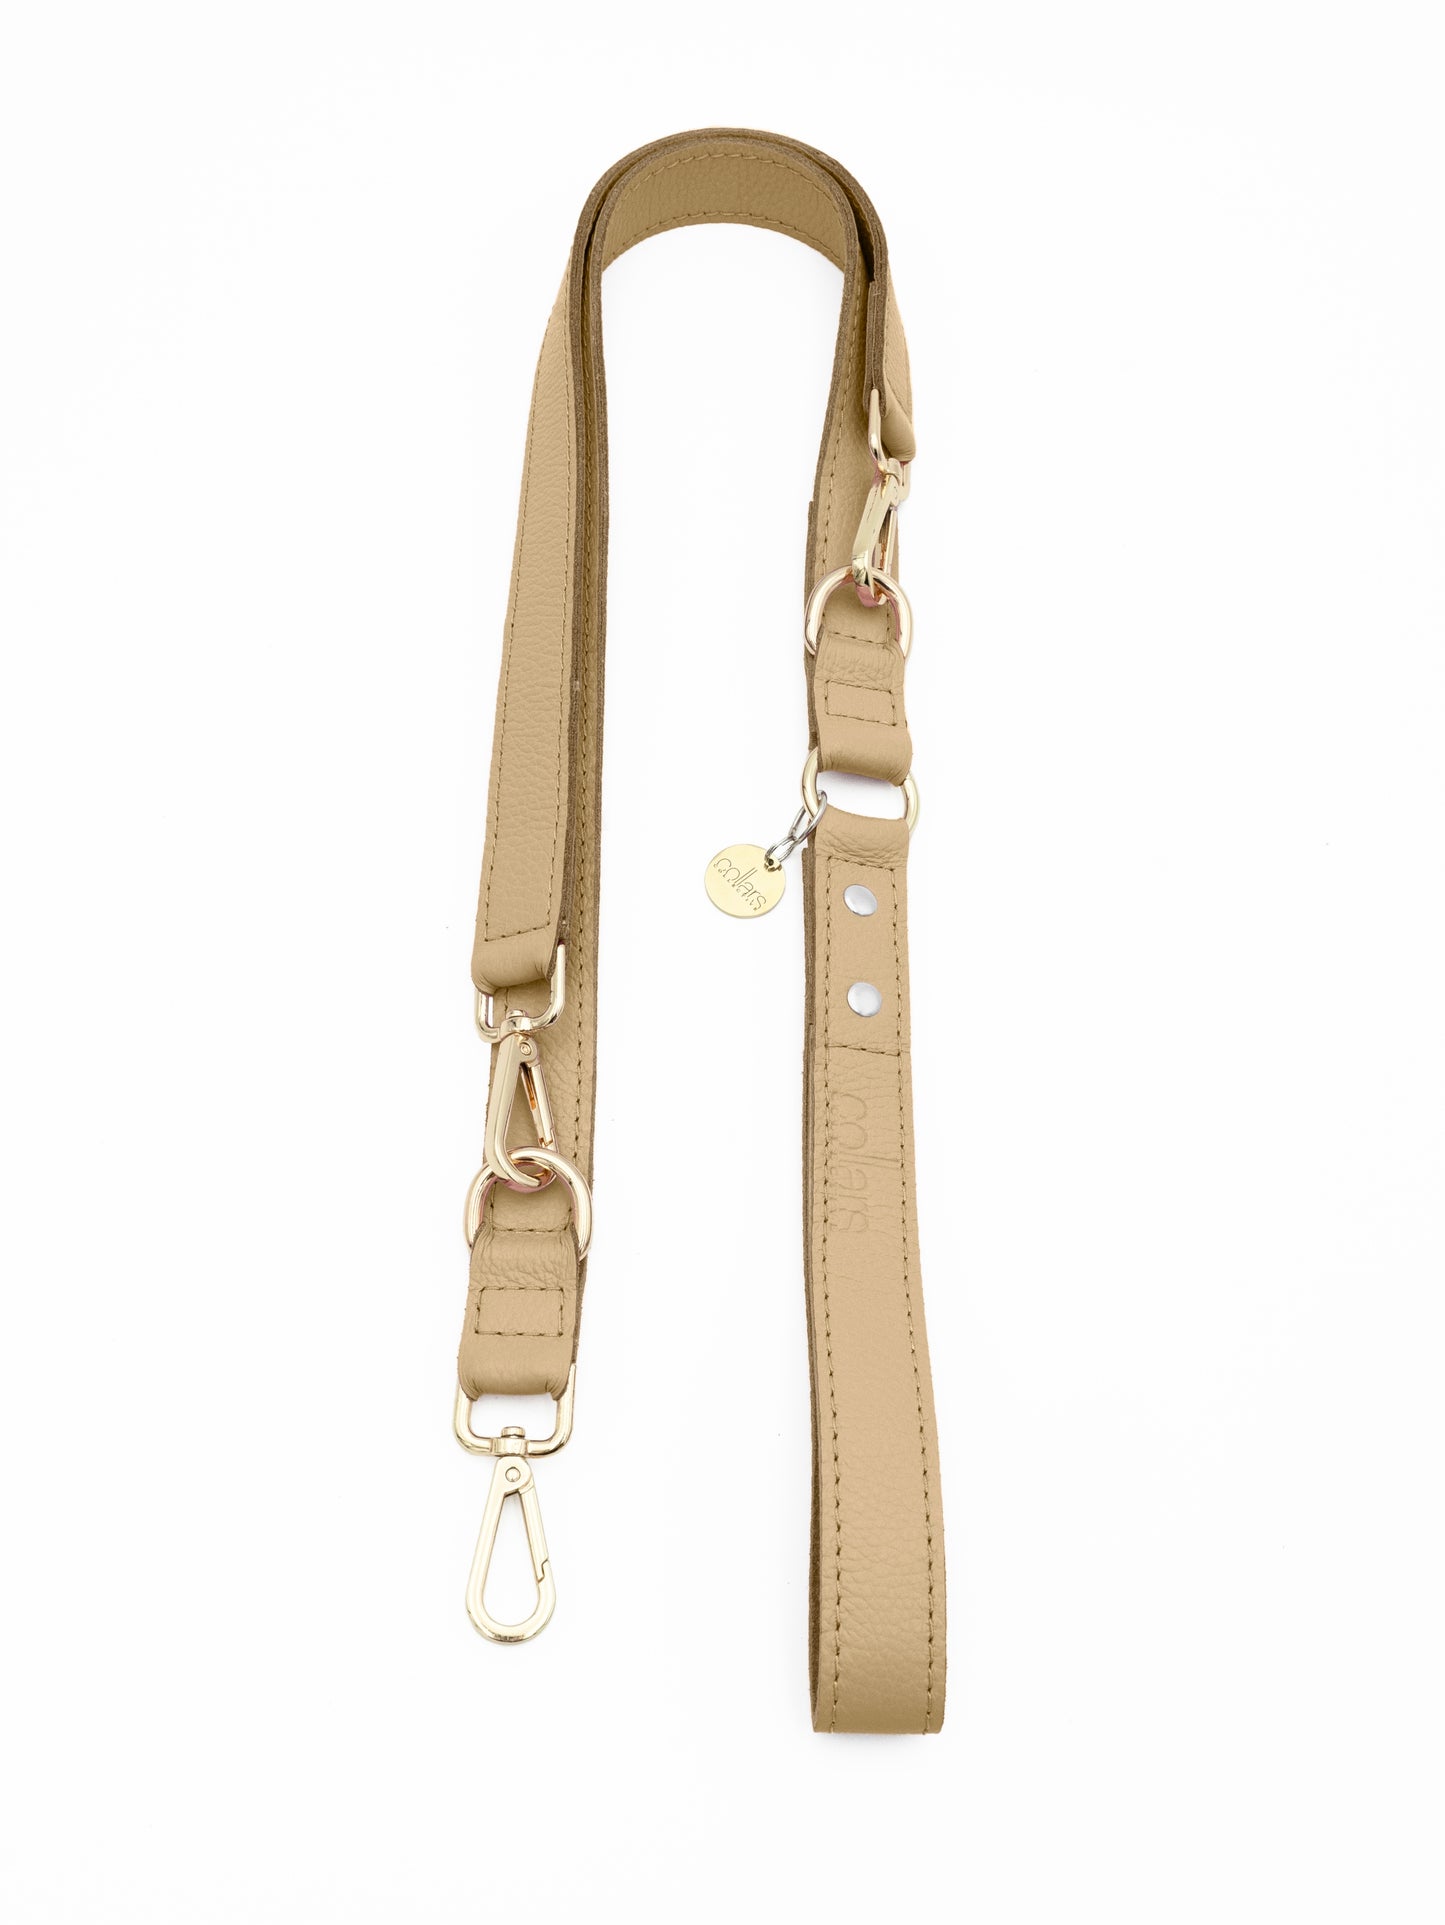 The Sand Iconic Leash